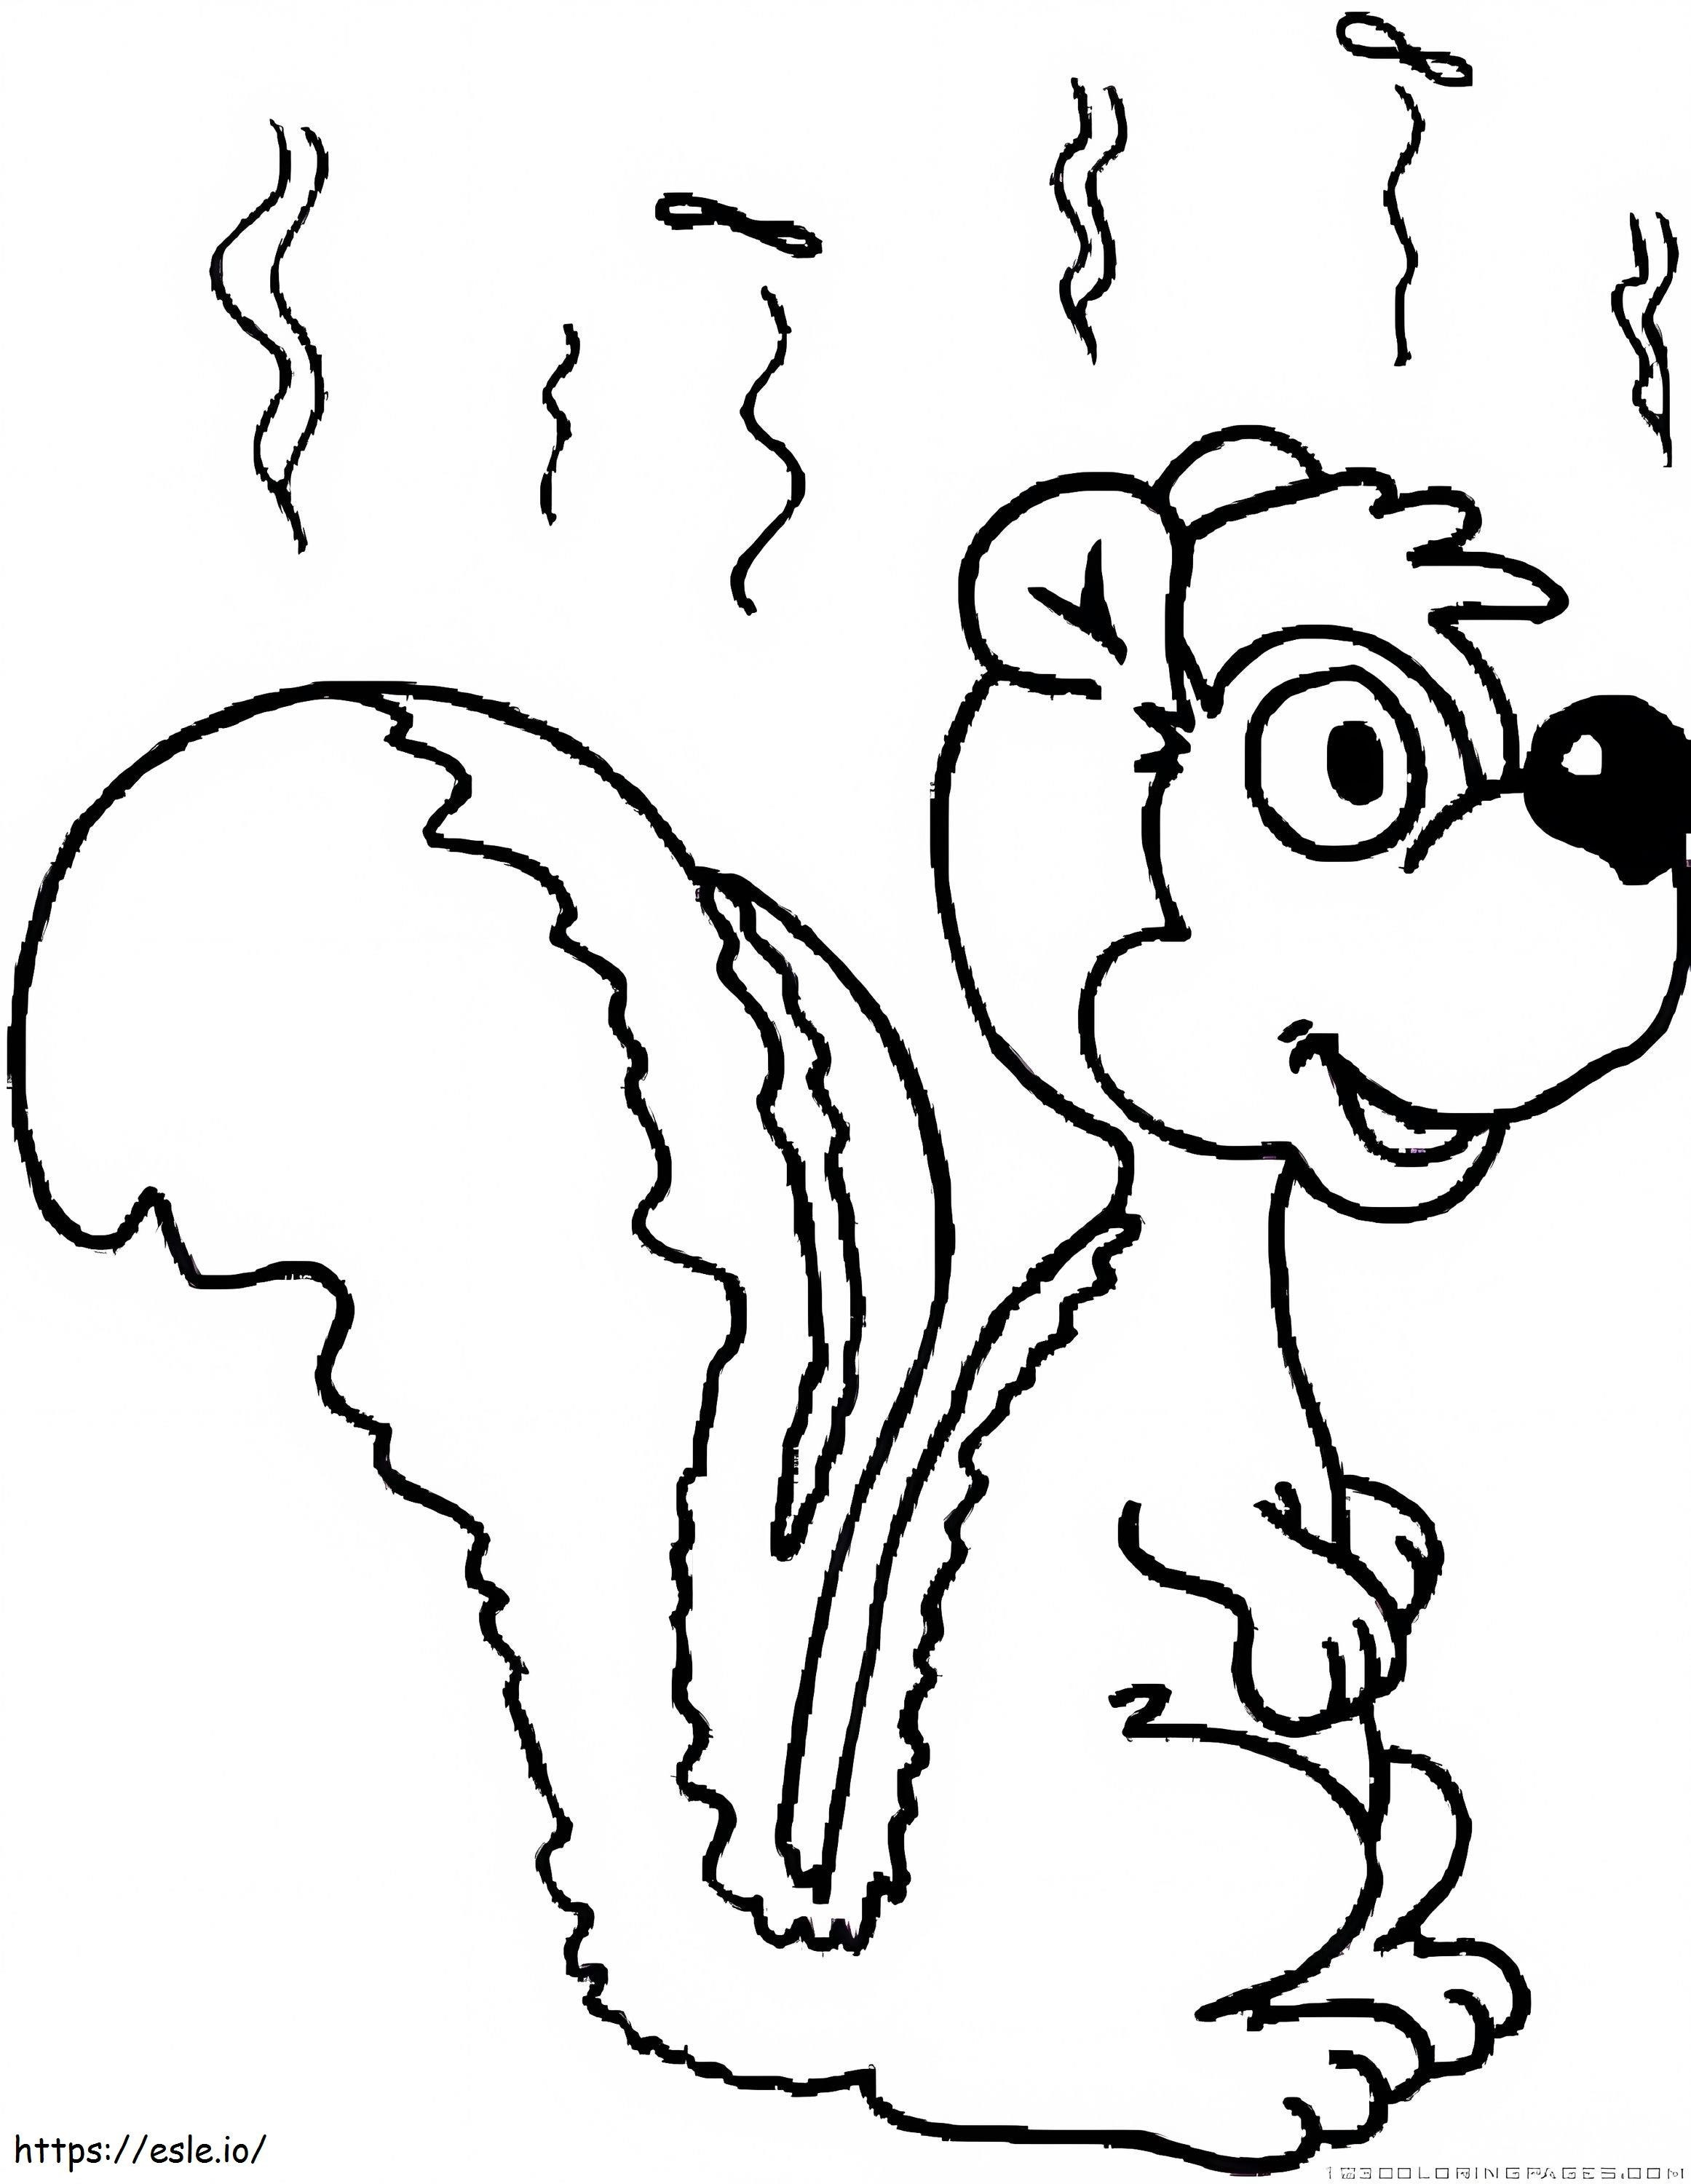 Sitting Skunk coloring page